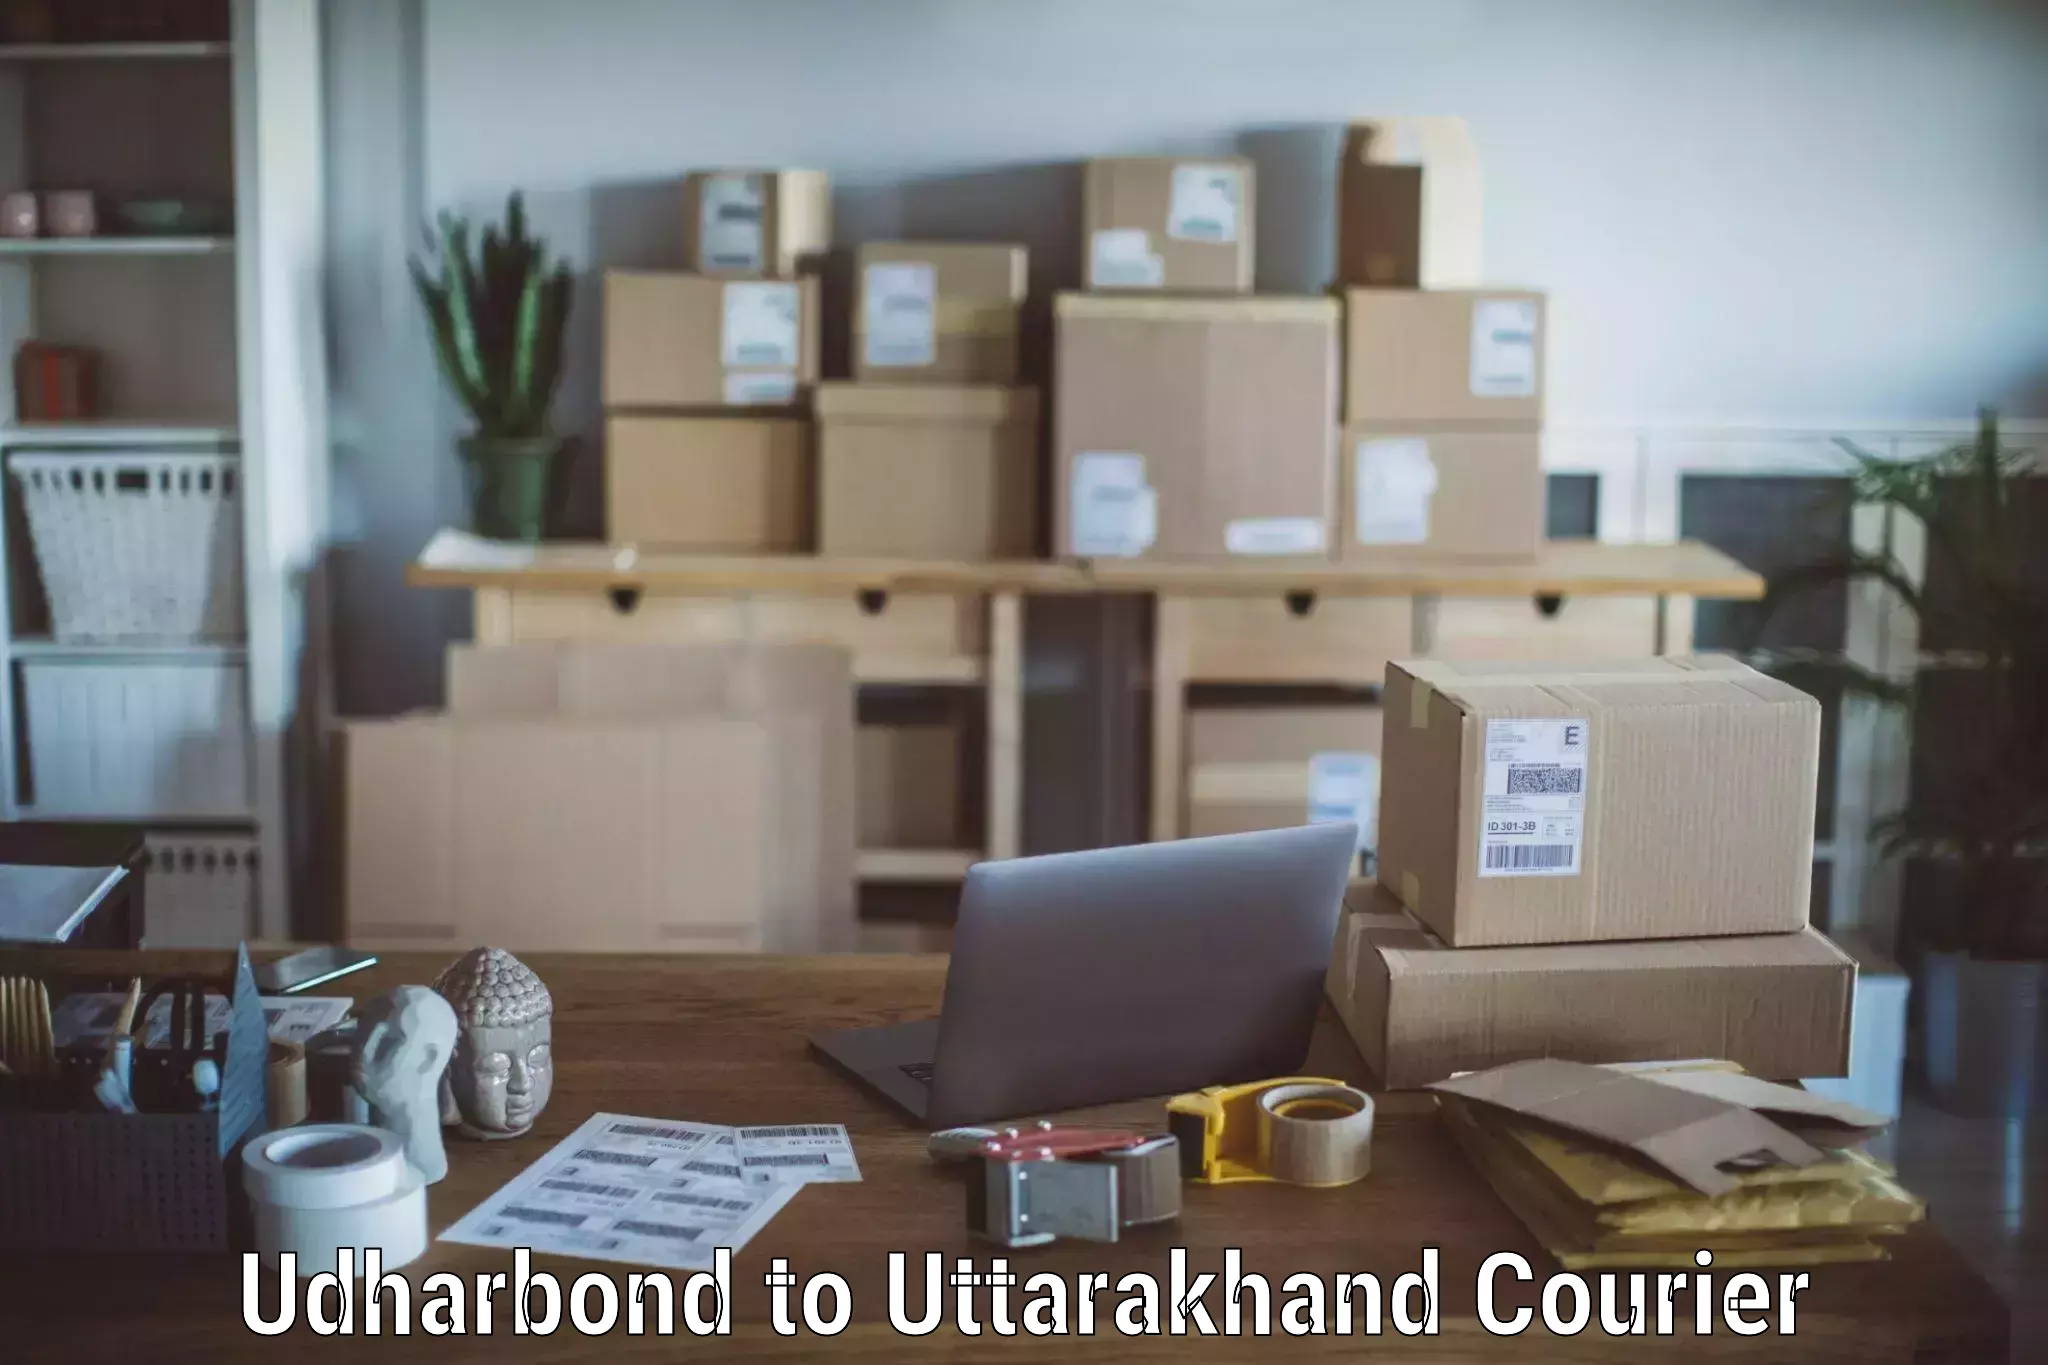 Trusted relocation experts Udharbond to Uttarakhand